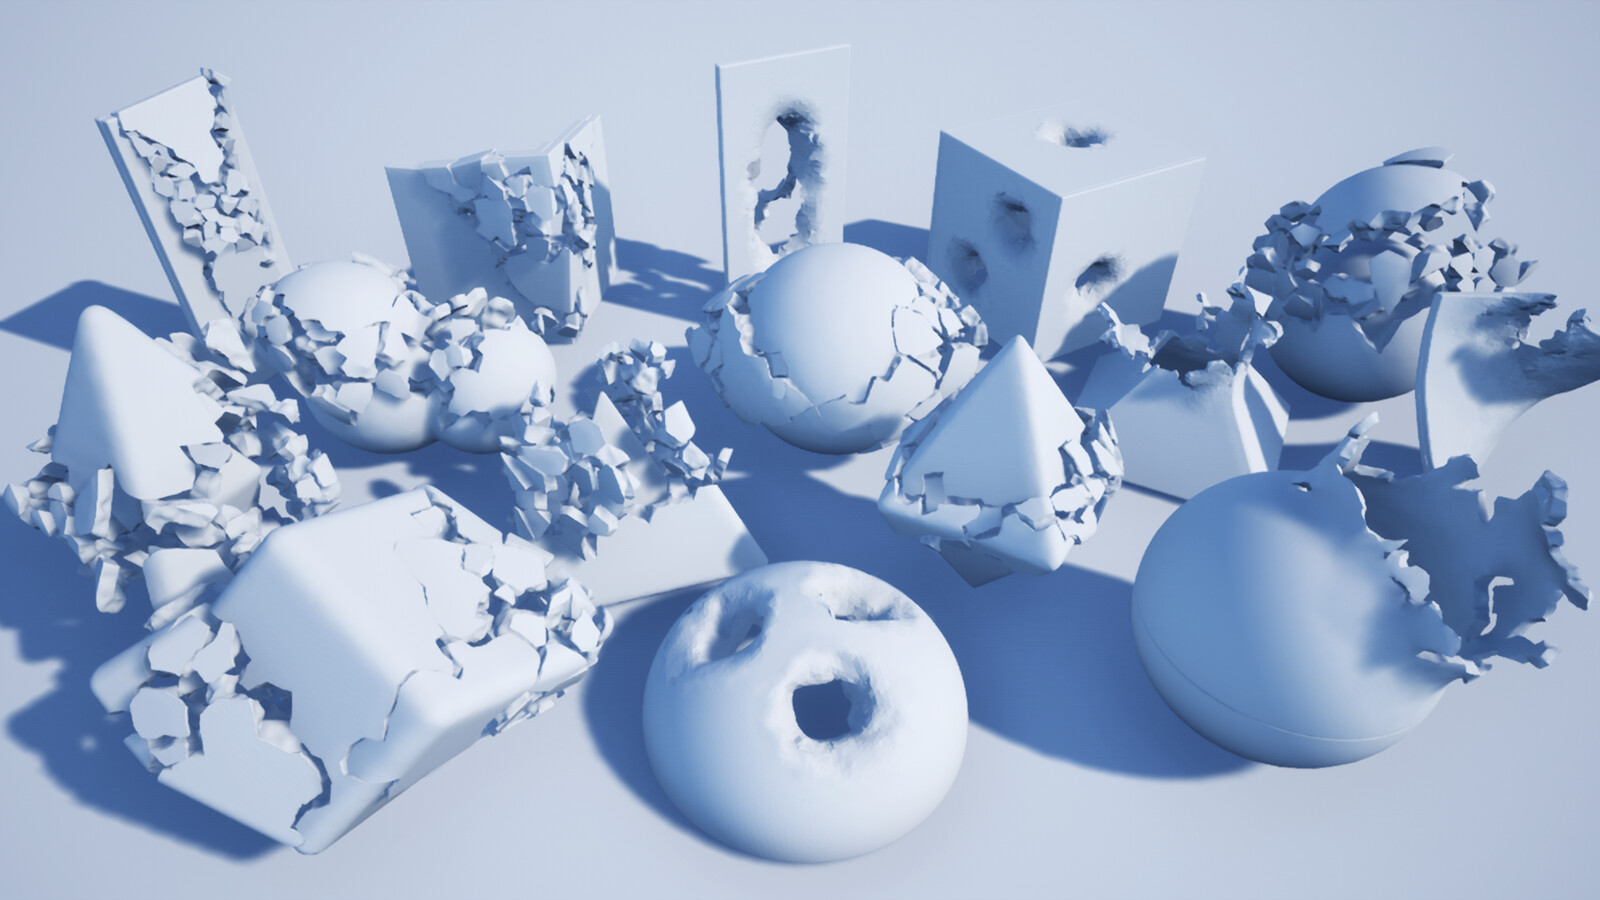 A variety of these sculptures brought into Unreal Engine.